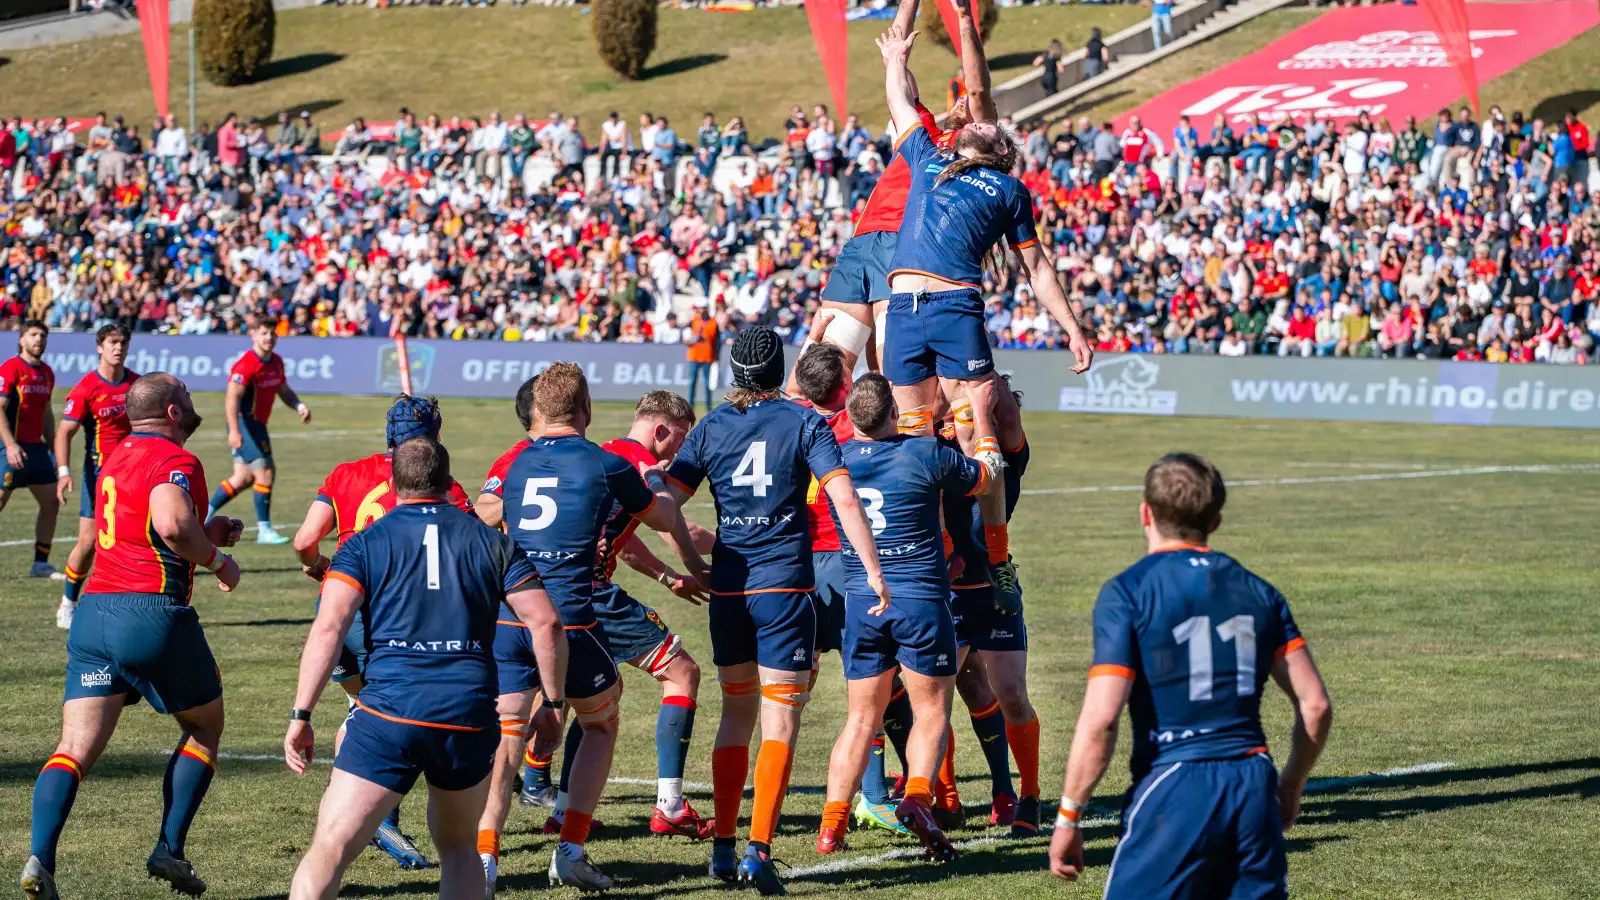 Spain and Netherlands contest a lineout at Estadio Nacional Complutense.